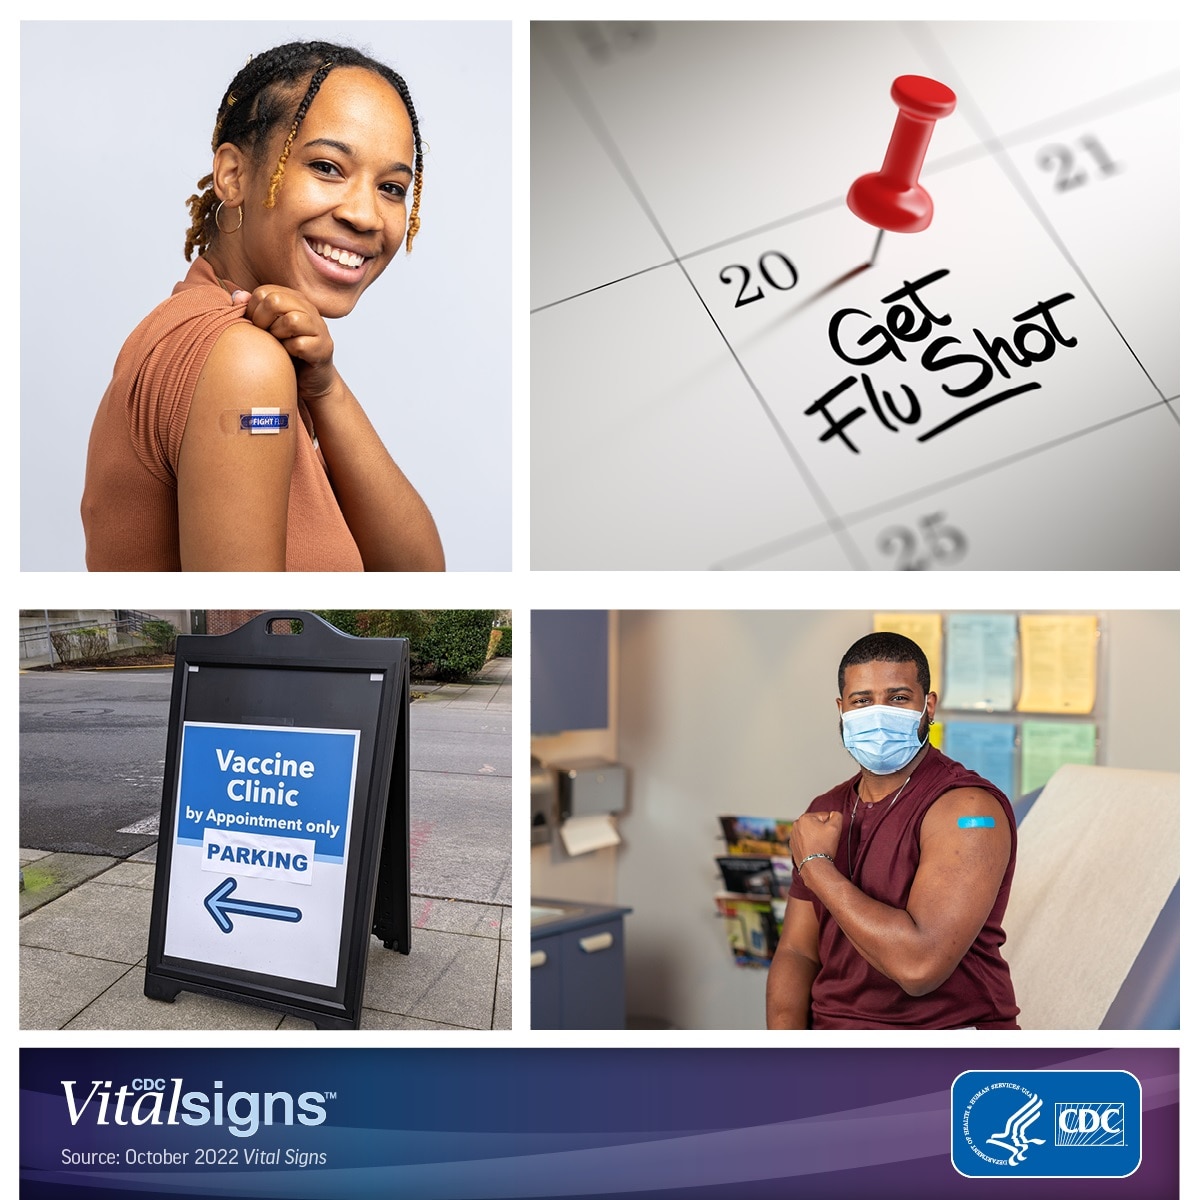 Photo collage of a woman who got vaccinated, a reminder on a calendar, a vaccine clinic sign, and a man who got vaccinated.